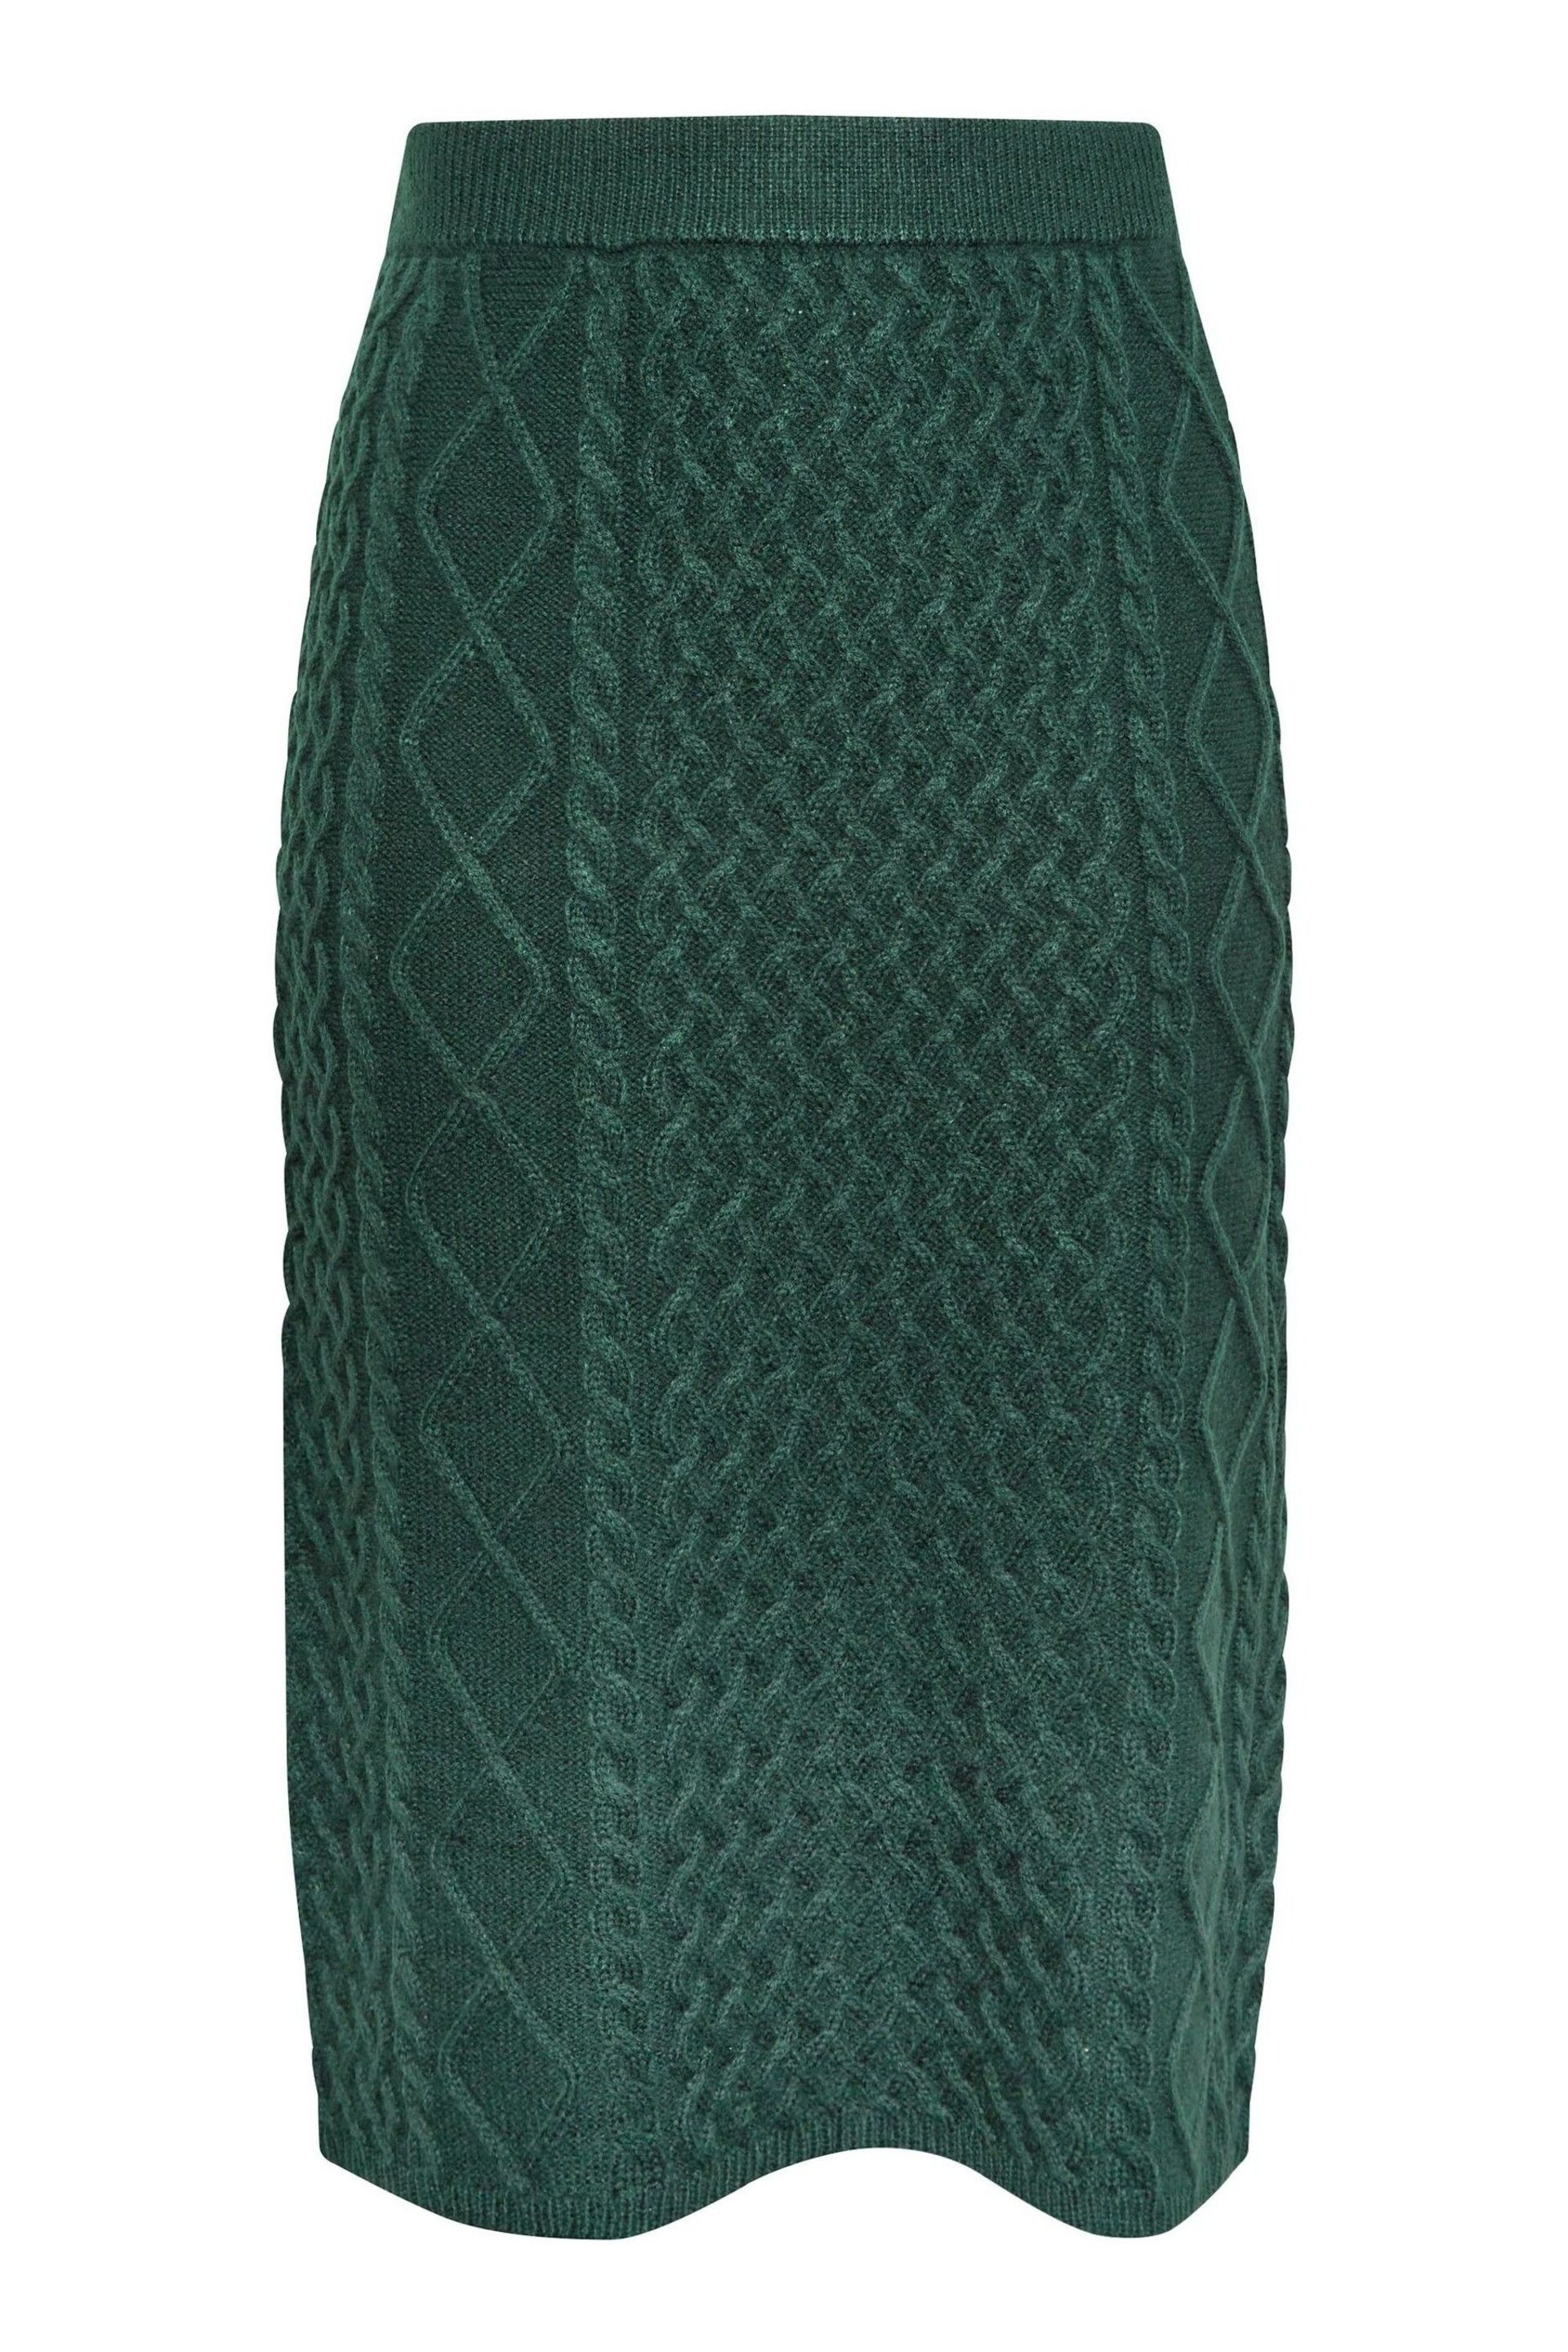 Yours Curve Green Cable Skirt - Image 4 of 4